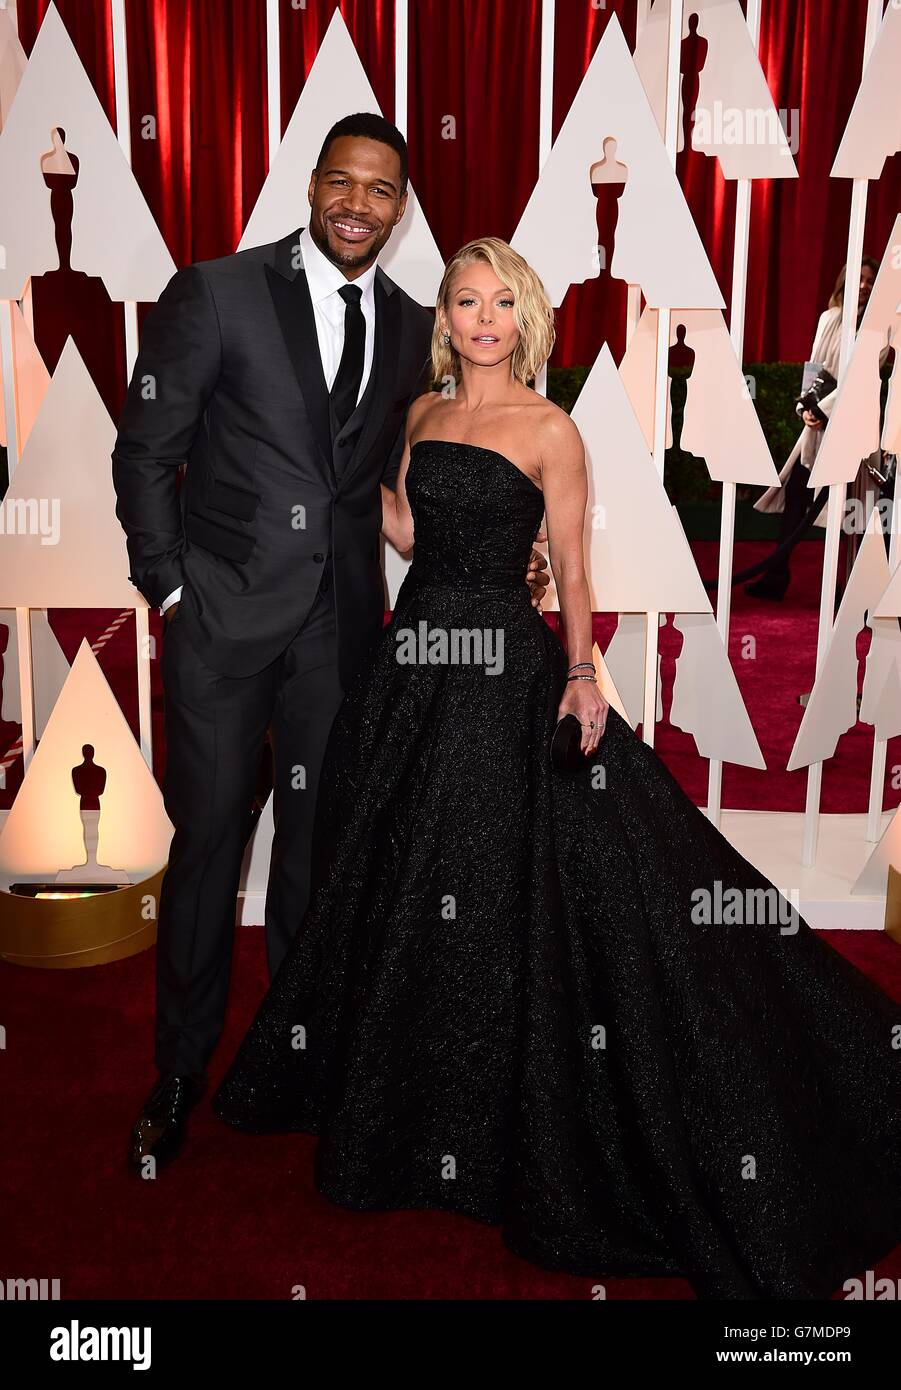 Kelly Ripa and Michael Strahan arriving at the 87th Academy Awards held at the Dolby Theatre in Hollywood, Los Angeles, CA, USA, February 22, 2015. Stock Photo